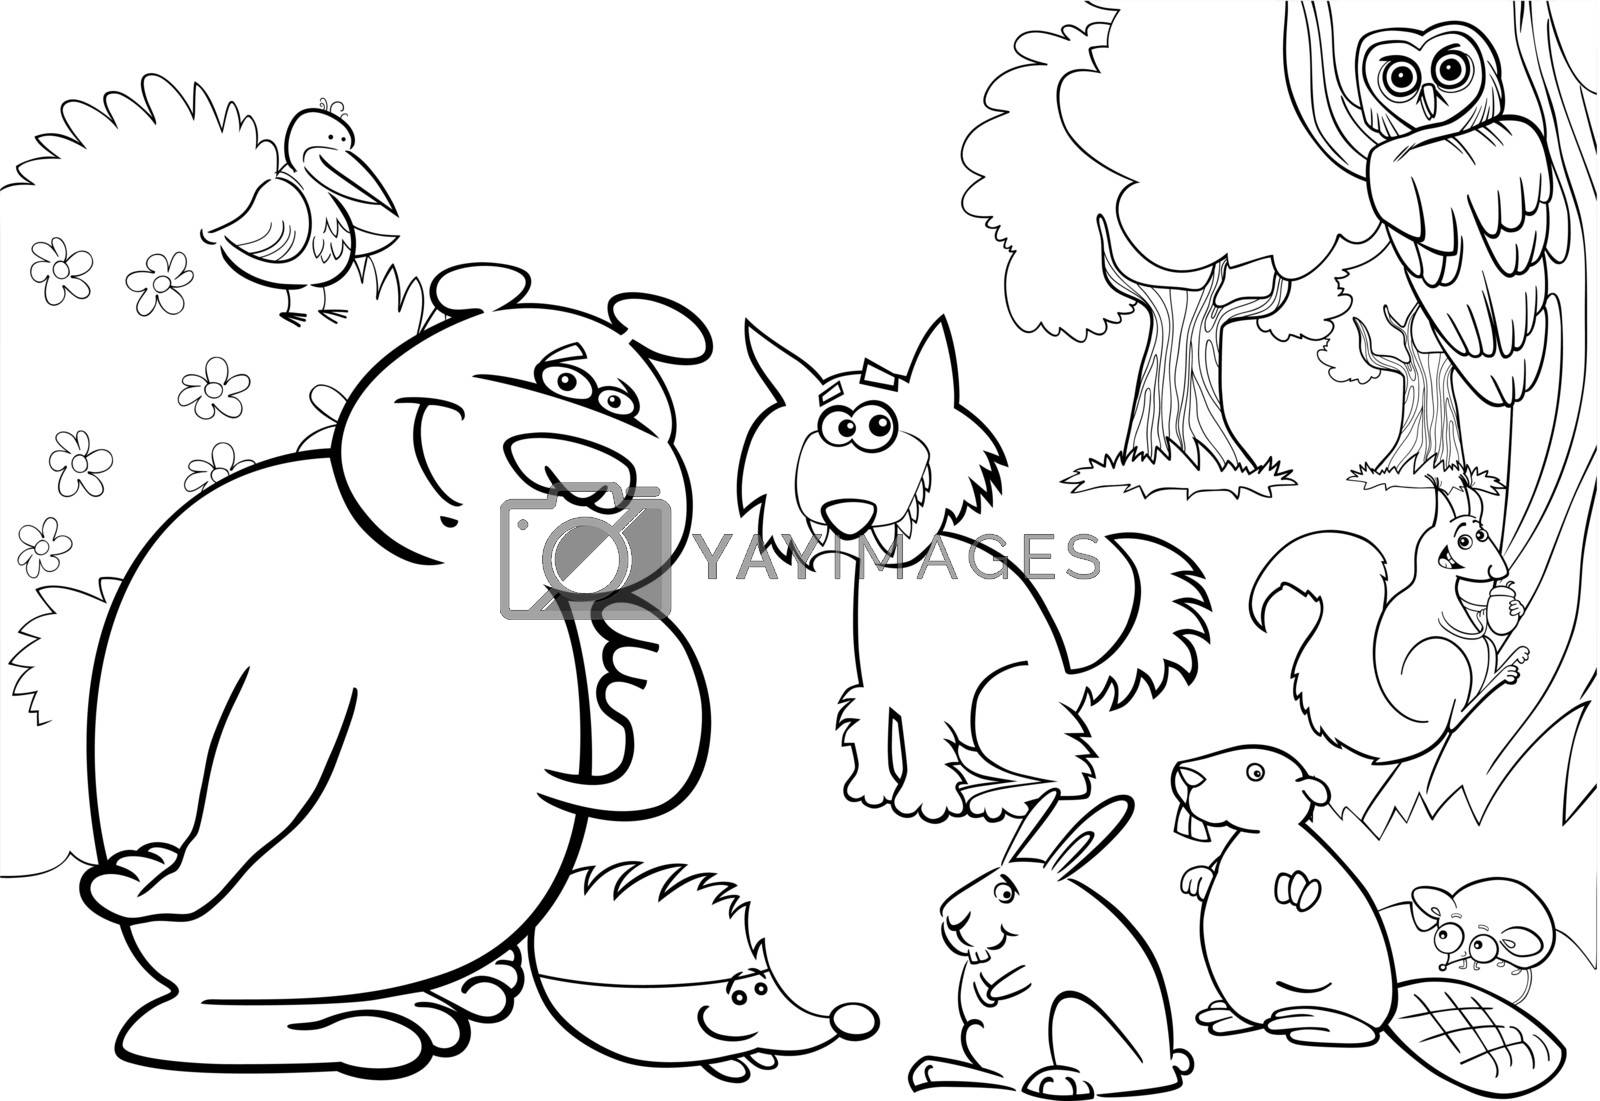 Royalty Free Vector | wild forest animals for coloring book by izakowski